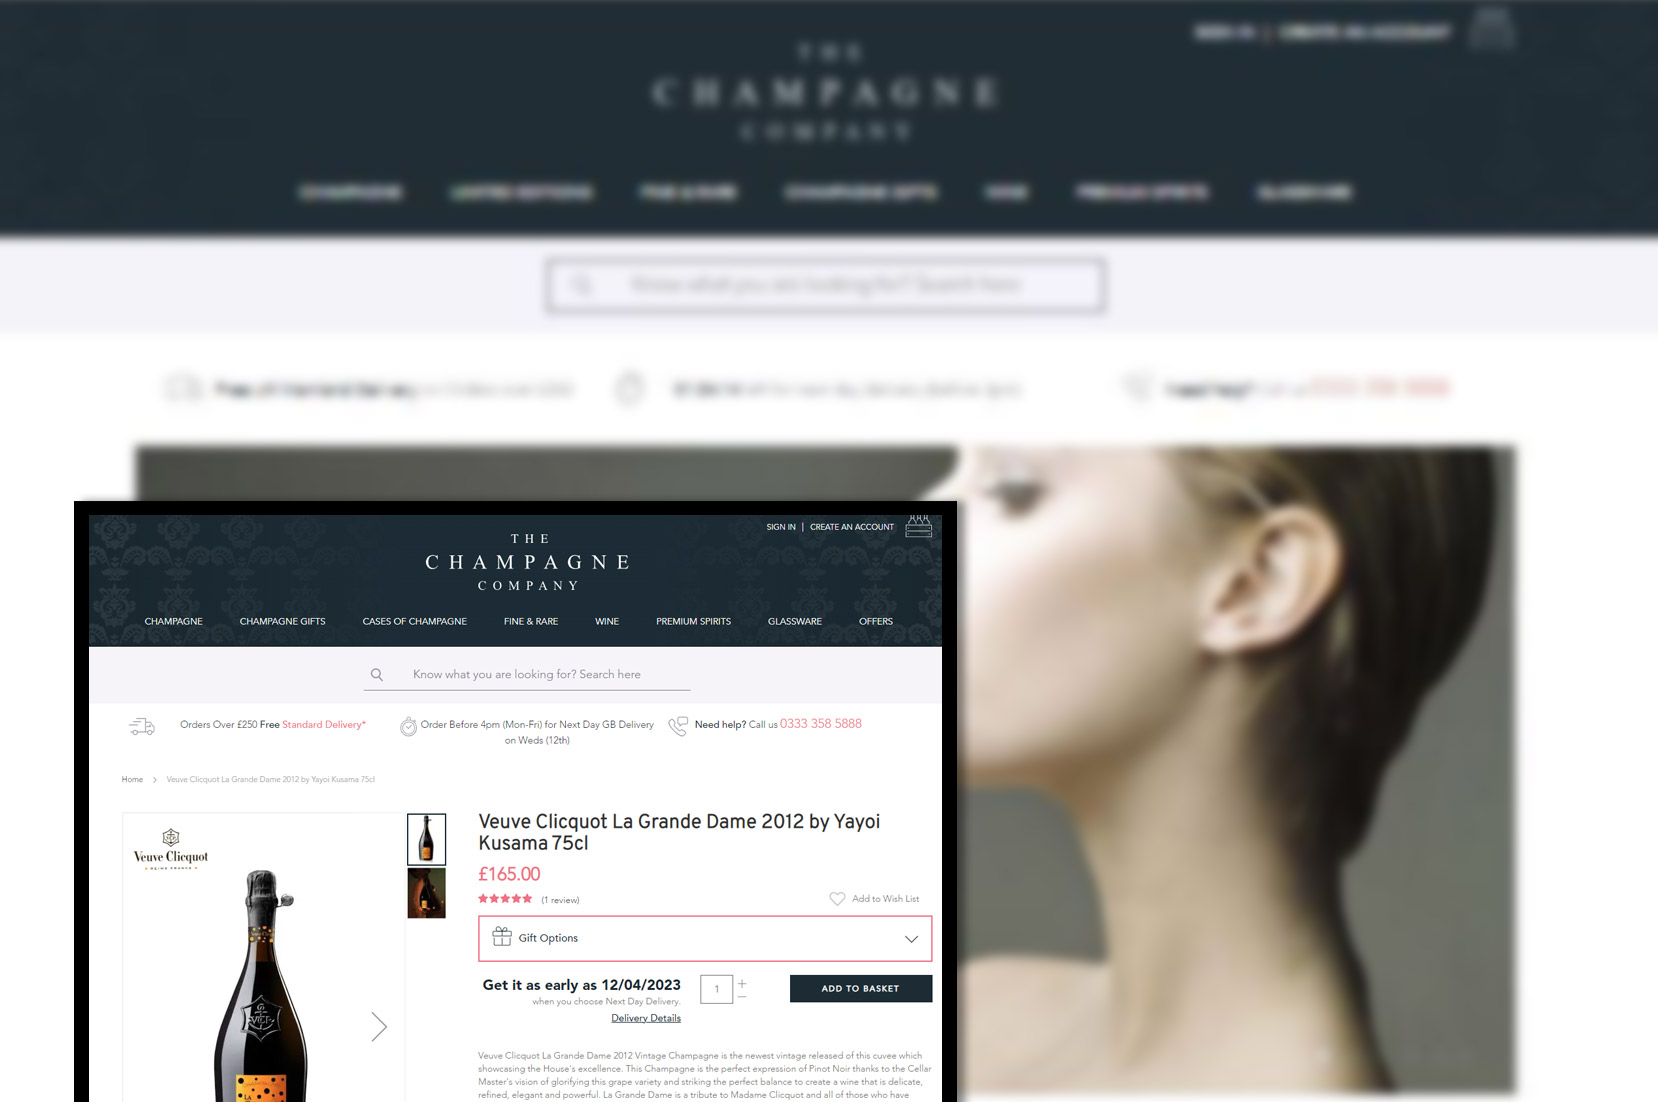 thechampagnecompany-comproduct-pricing-information-and-image-scraping-services